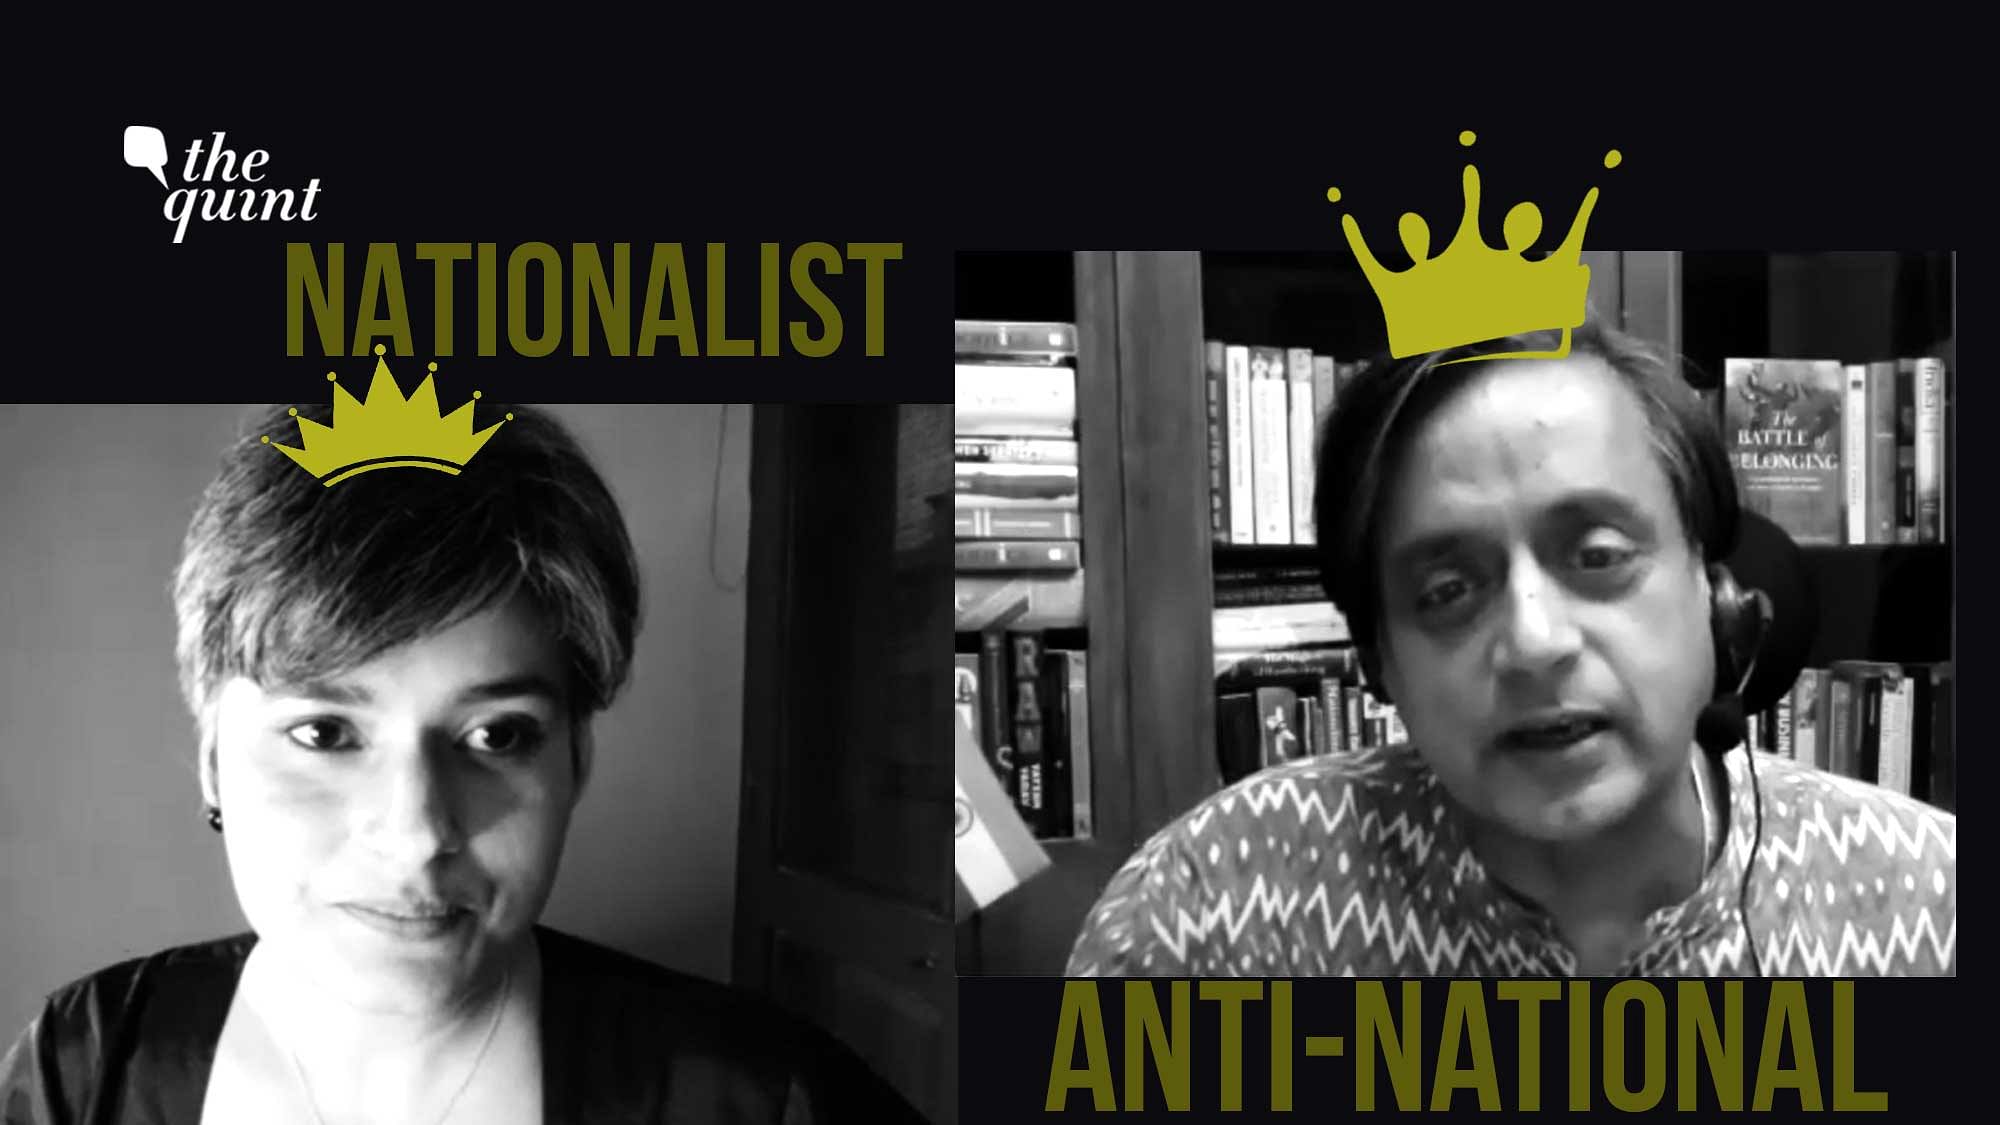 Shashi Tharoor in a candid interview about Hinduism, nationalism, belonging, and a lot more with The Quint’s Nishtha Gautam